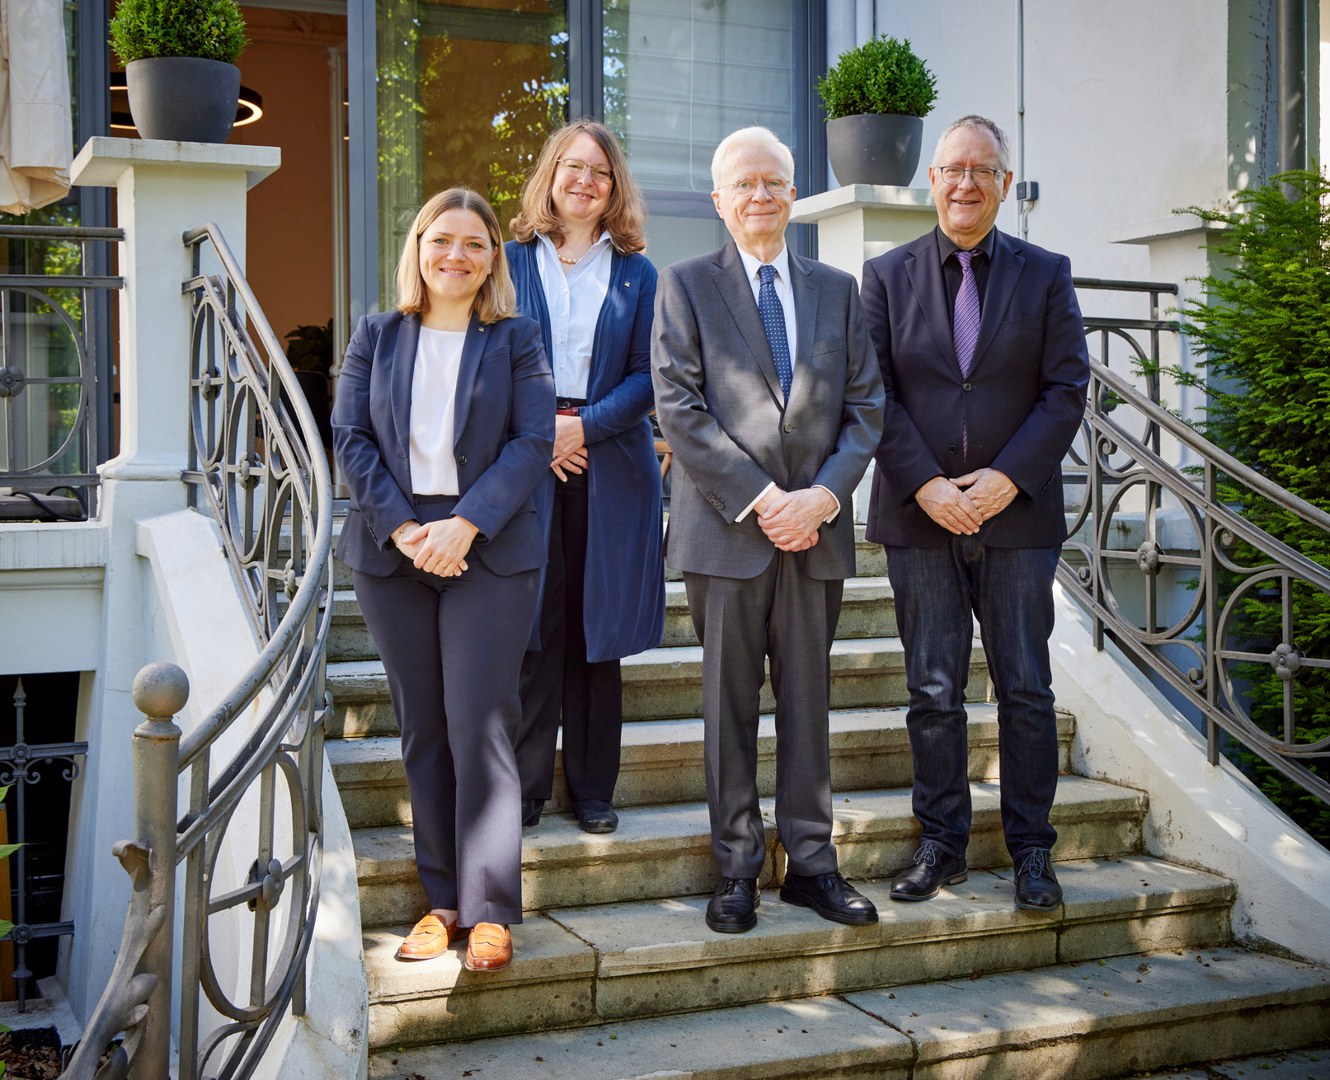 After setting up the foundation: Antonia Streit, General Manager of the University of Bonn Foundation; Prof. Dr. Cornelia Richter, Dean; Dr. Holger Aulepp; and Prof. Dr. Dr. h.c. Michael Hoch, Rector of the University